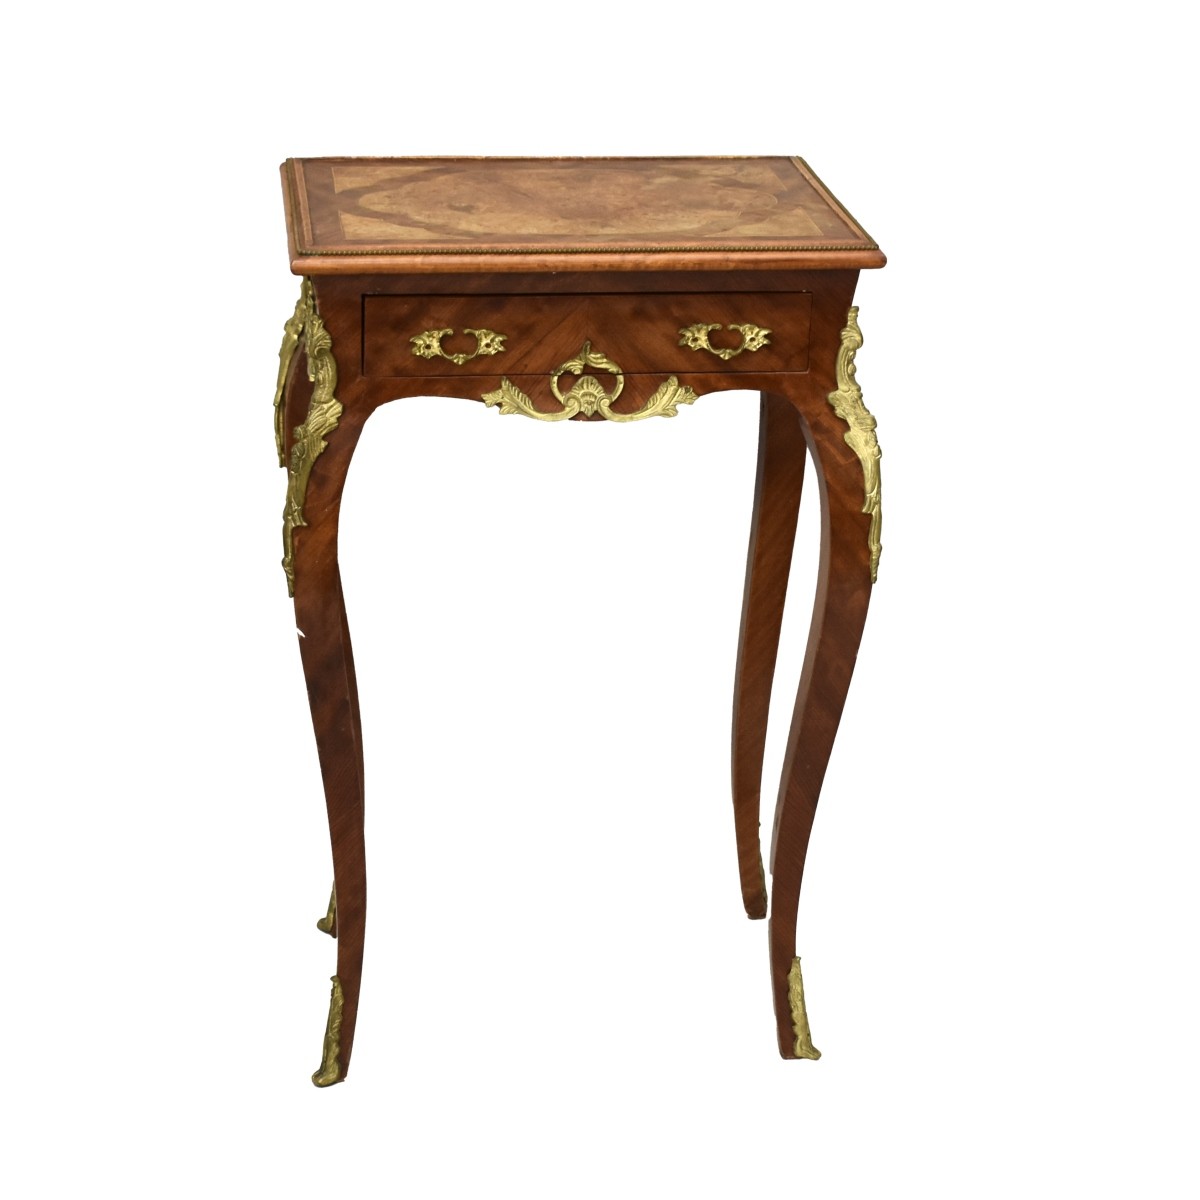 Mid 20th C. Louis XVI Style Side Table